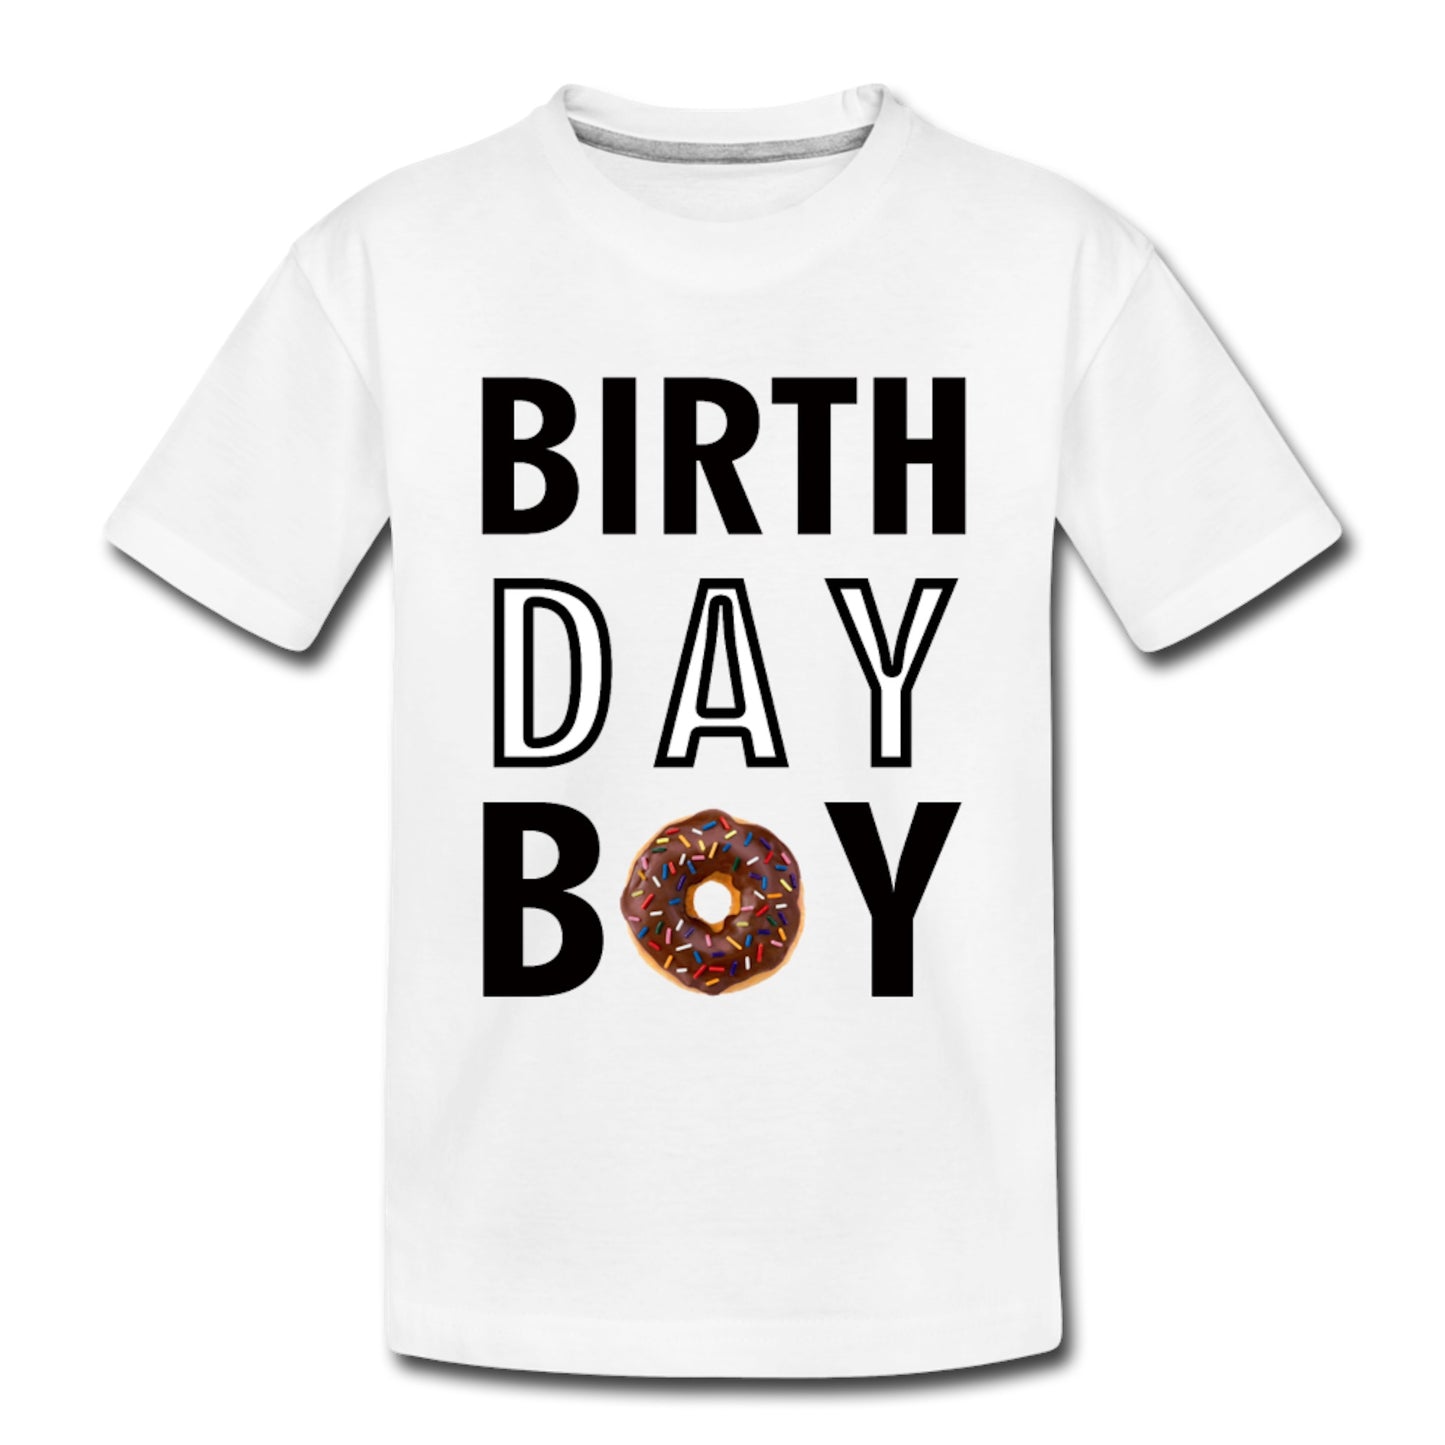 Birthday Matching Tee For Family, Mom of the Birthday Boy, Dad of the Birthday Boy T-shirt, Birthday Boy Shirt, toddler kids birthday shirt